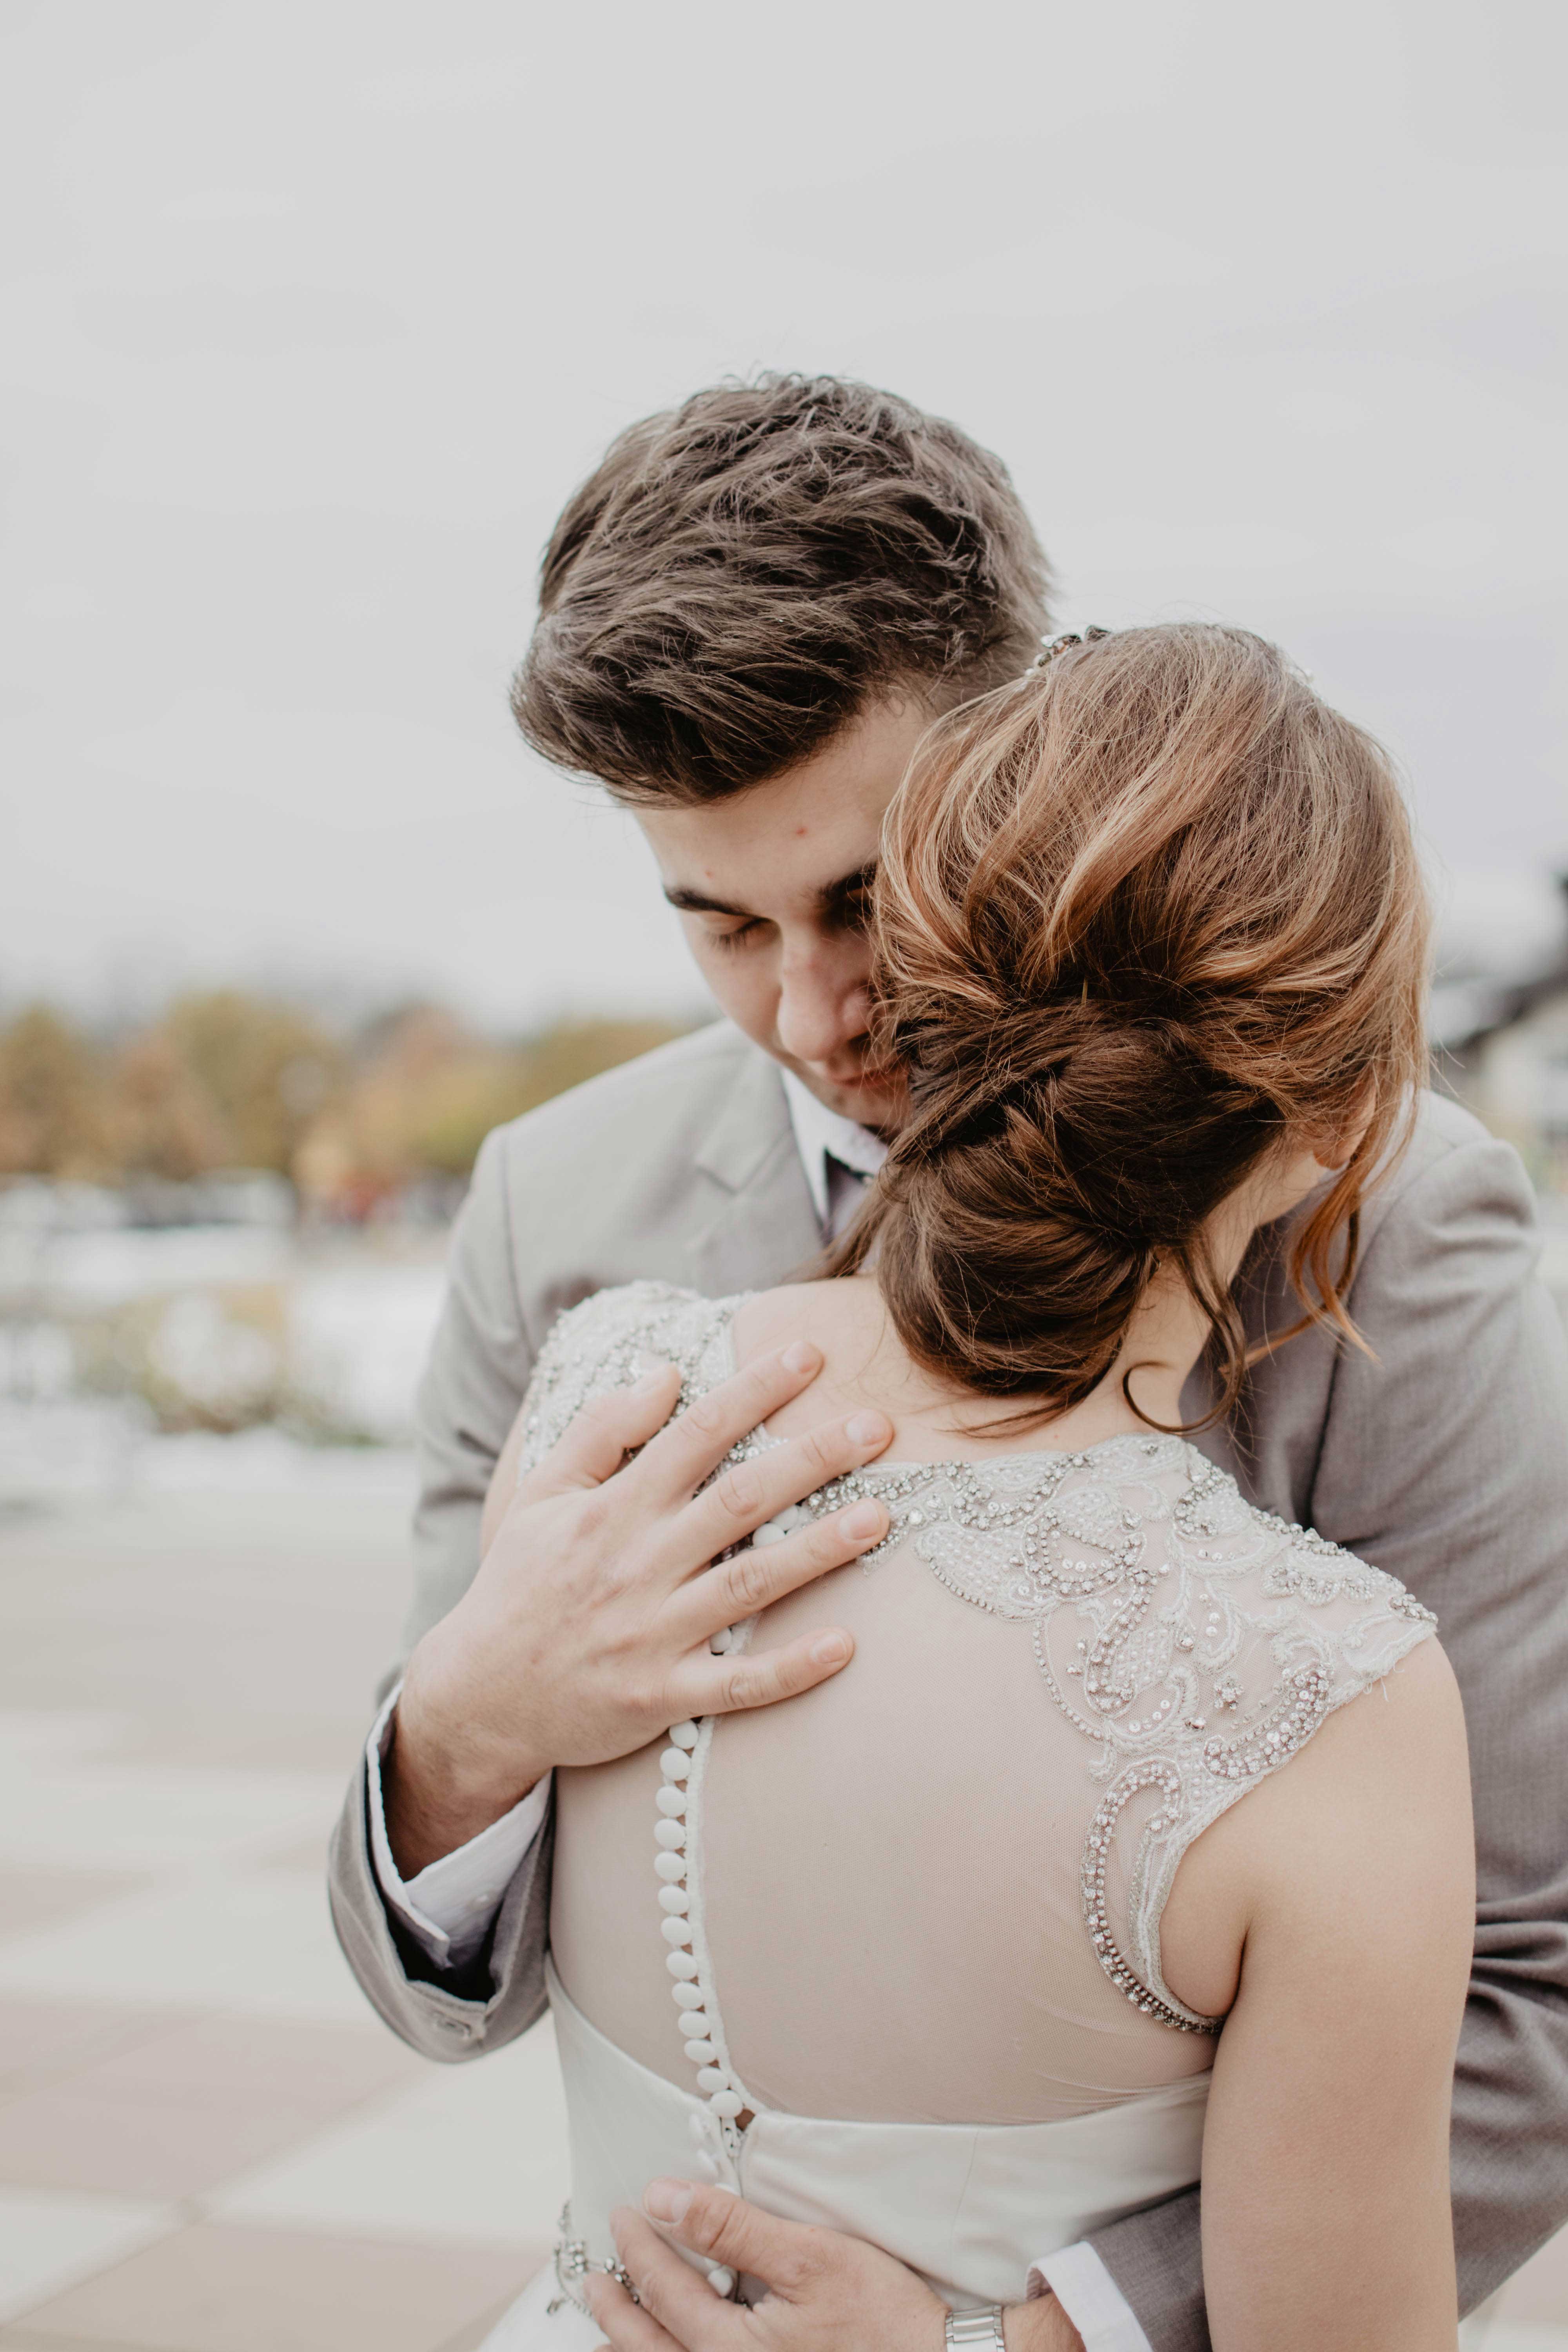 after-wedding-checklist-what-to-do-after-wedding-15